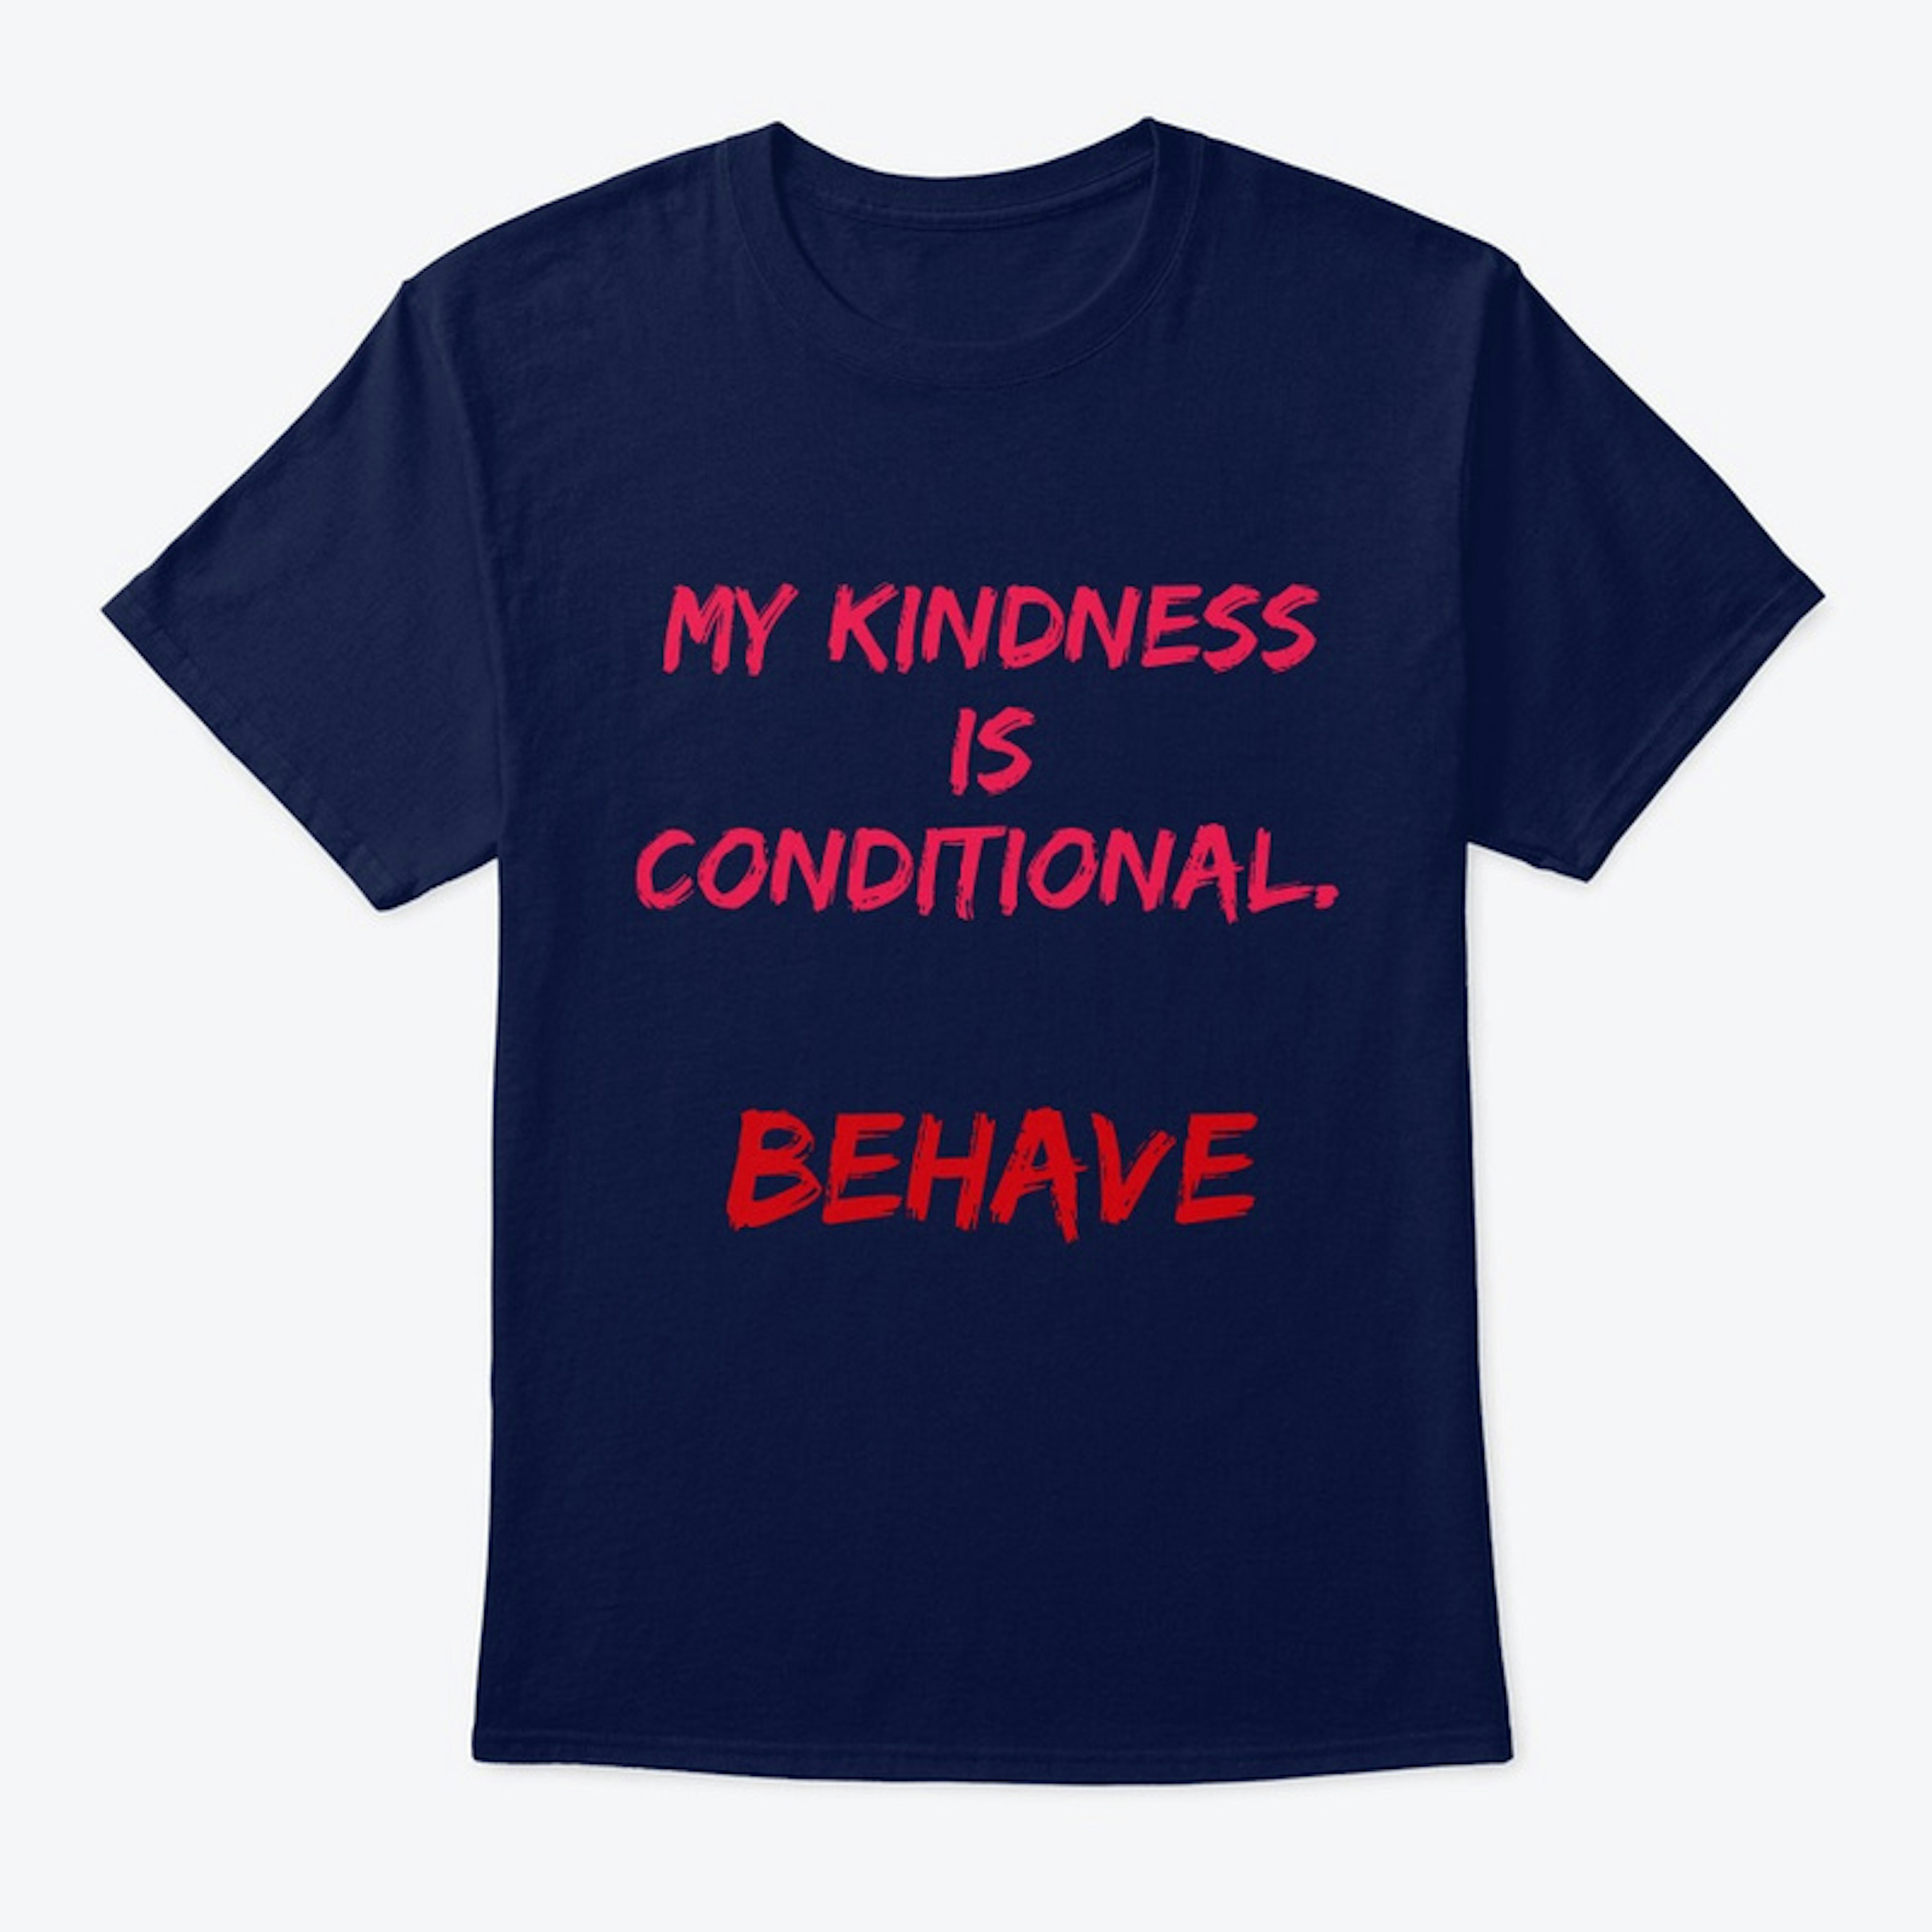 My kindness is conditional